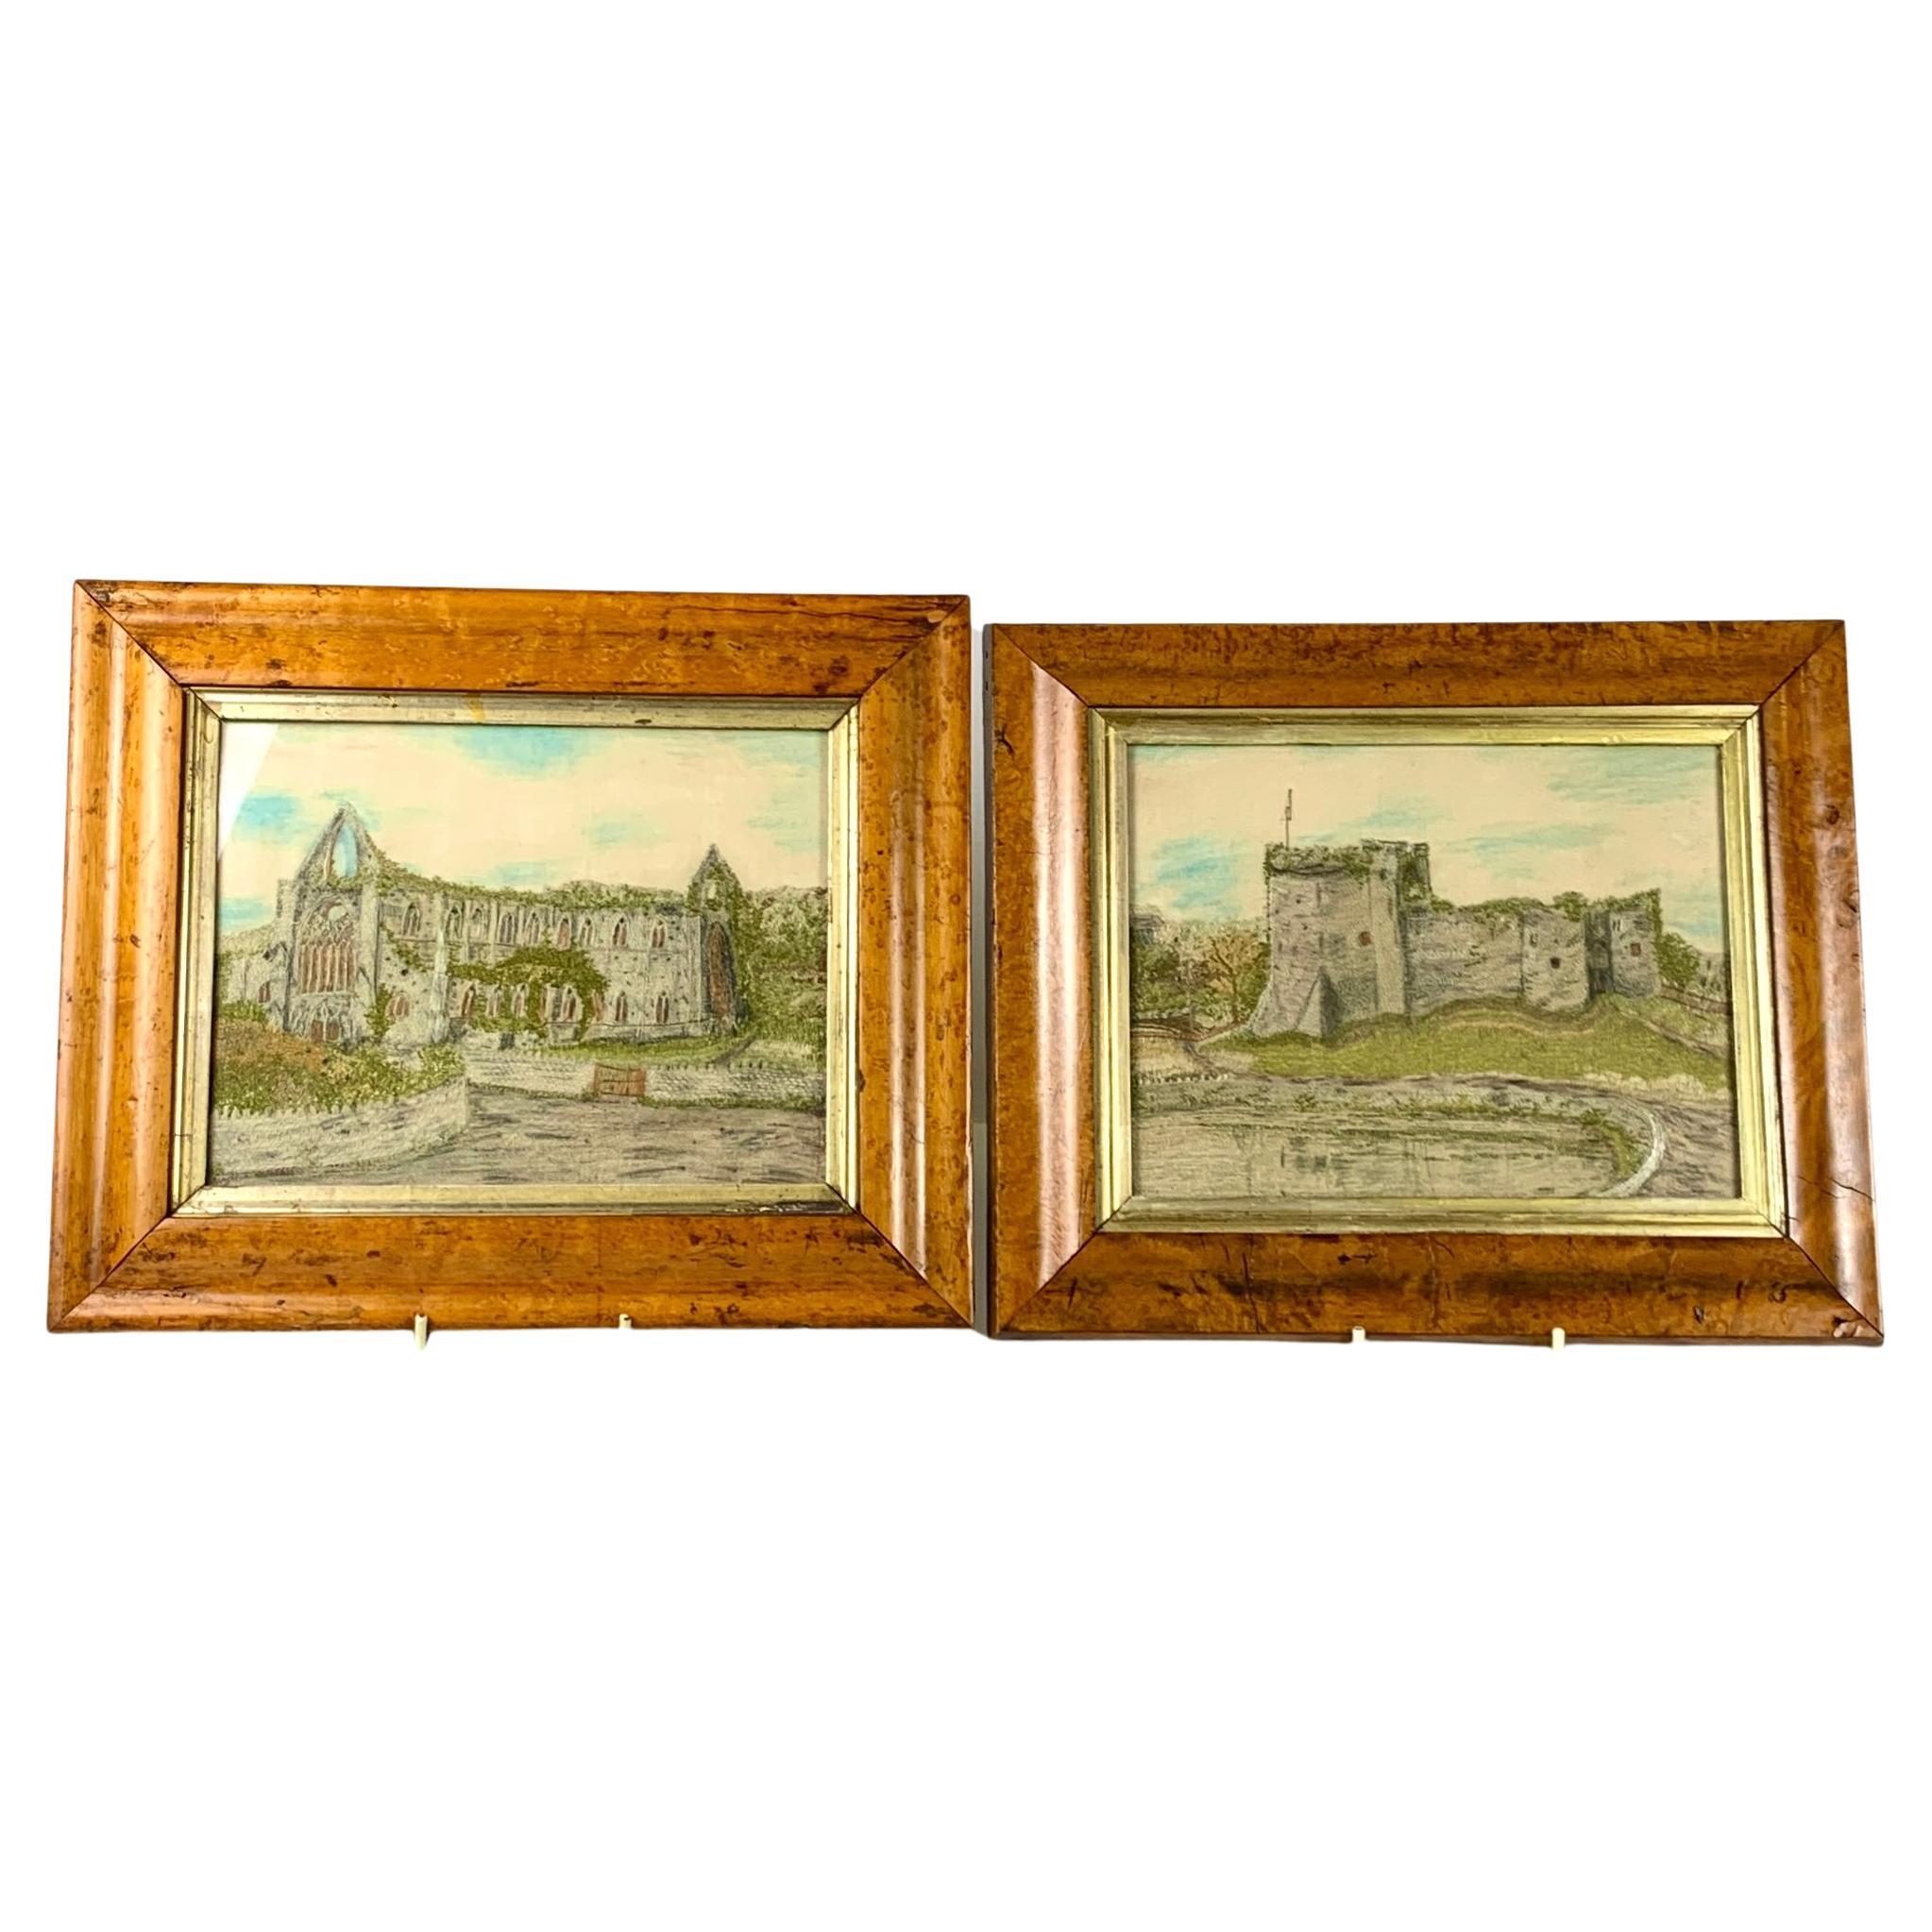 Pair Silk Needleworks Showing Ruins of Tintern Abbey and an English Castle